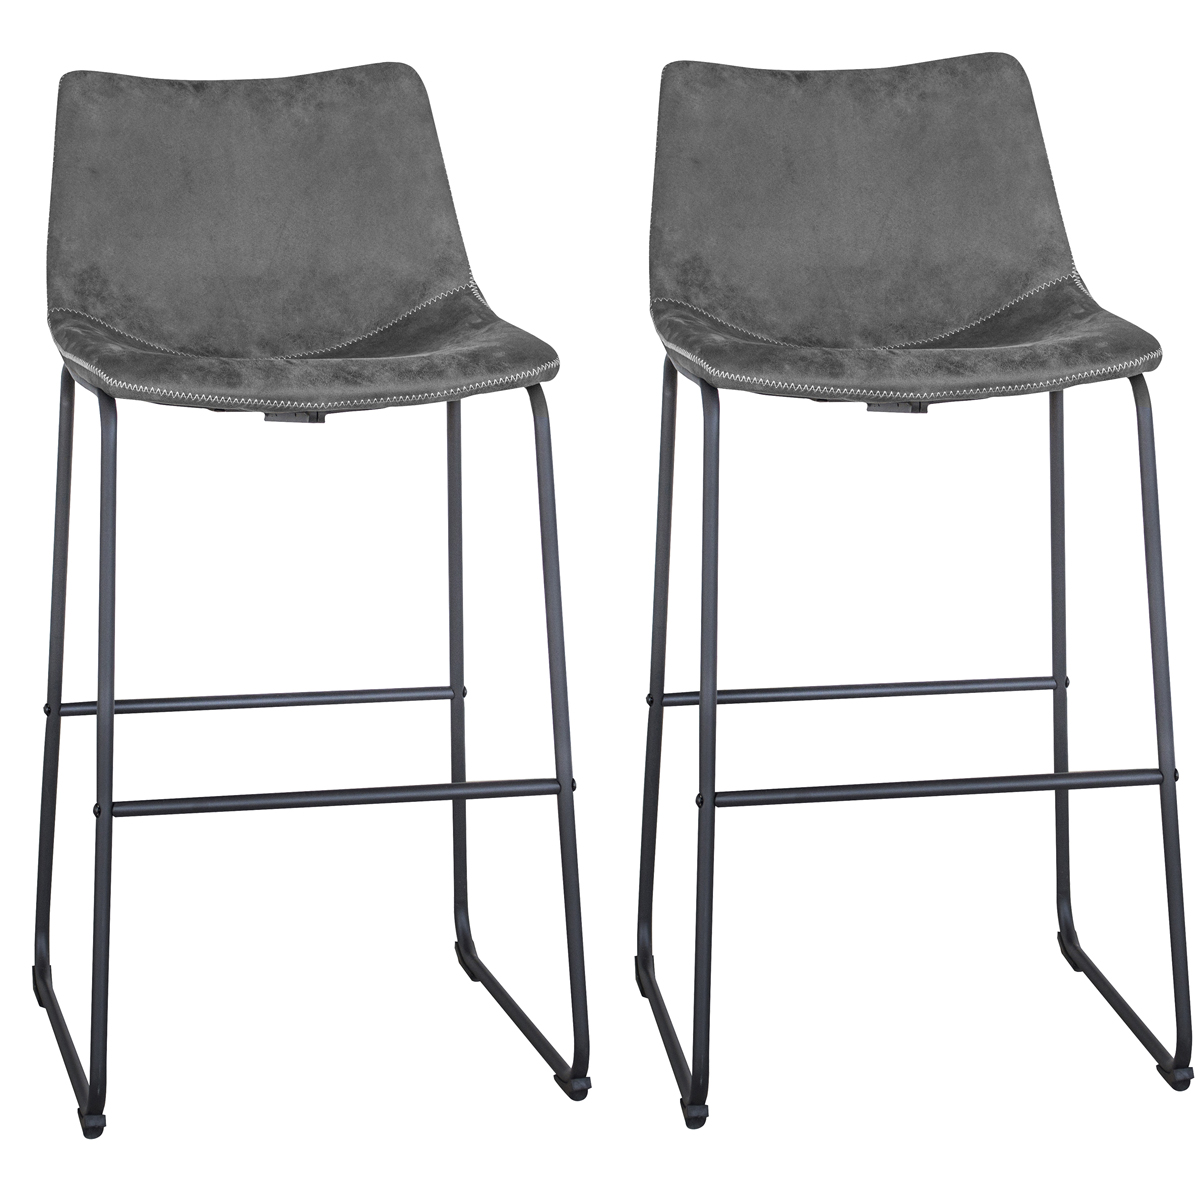 Classic Gray Faux Leather Bar Chair Set